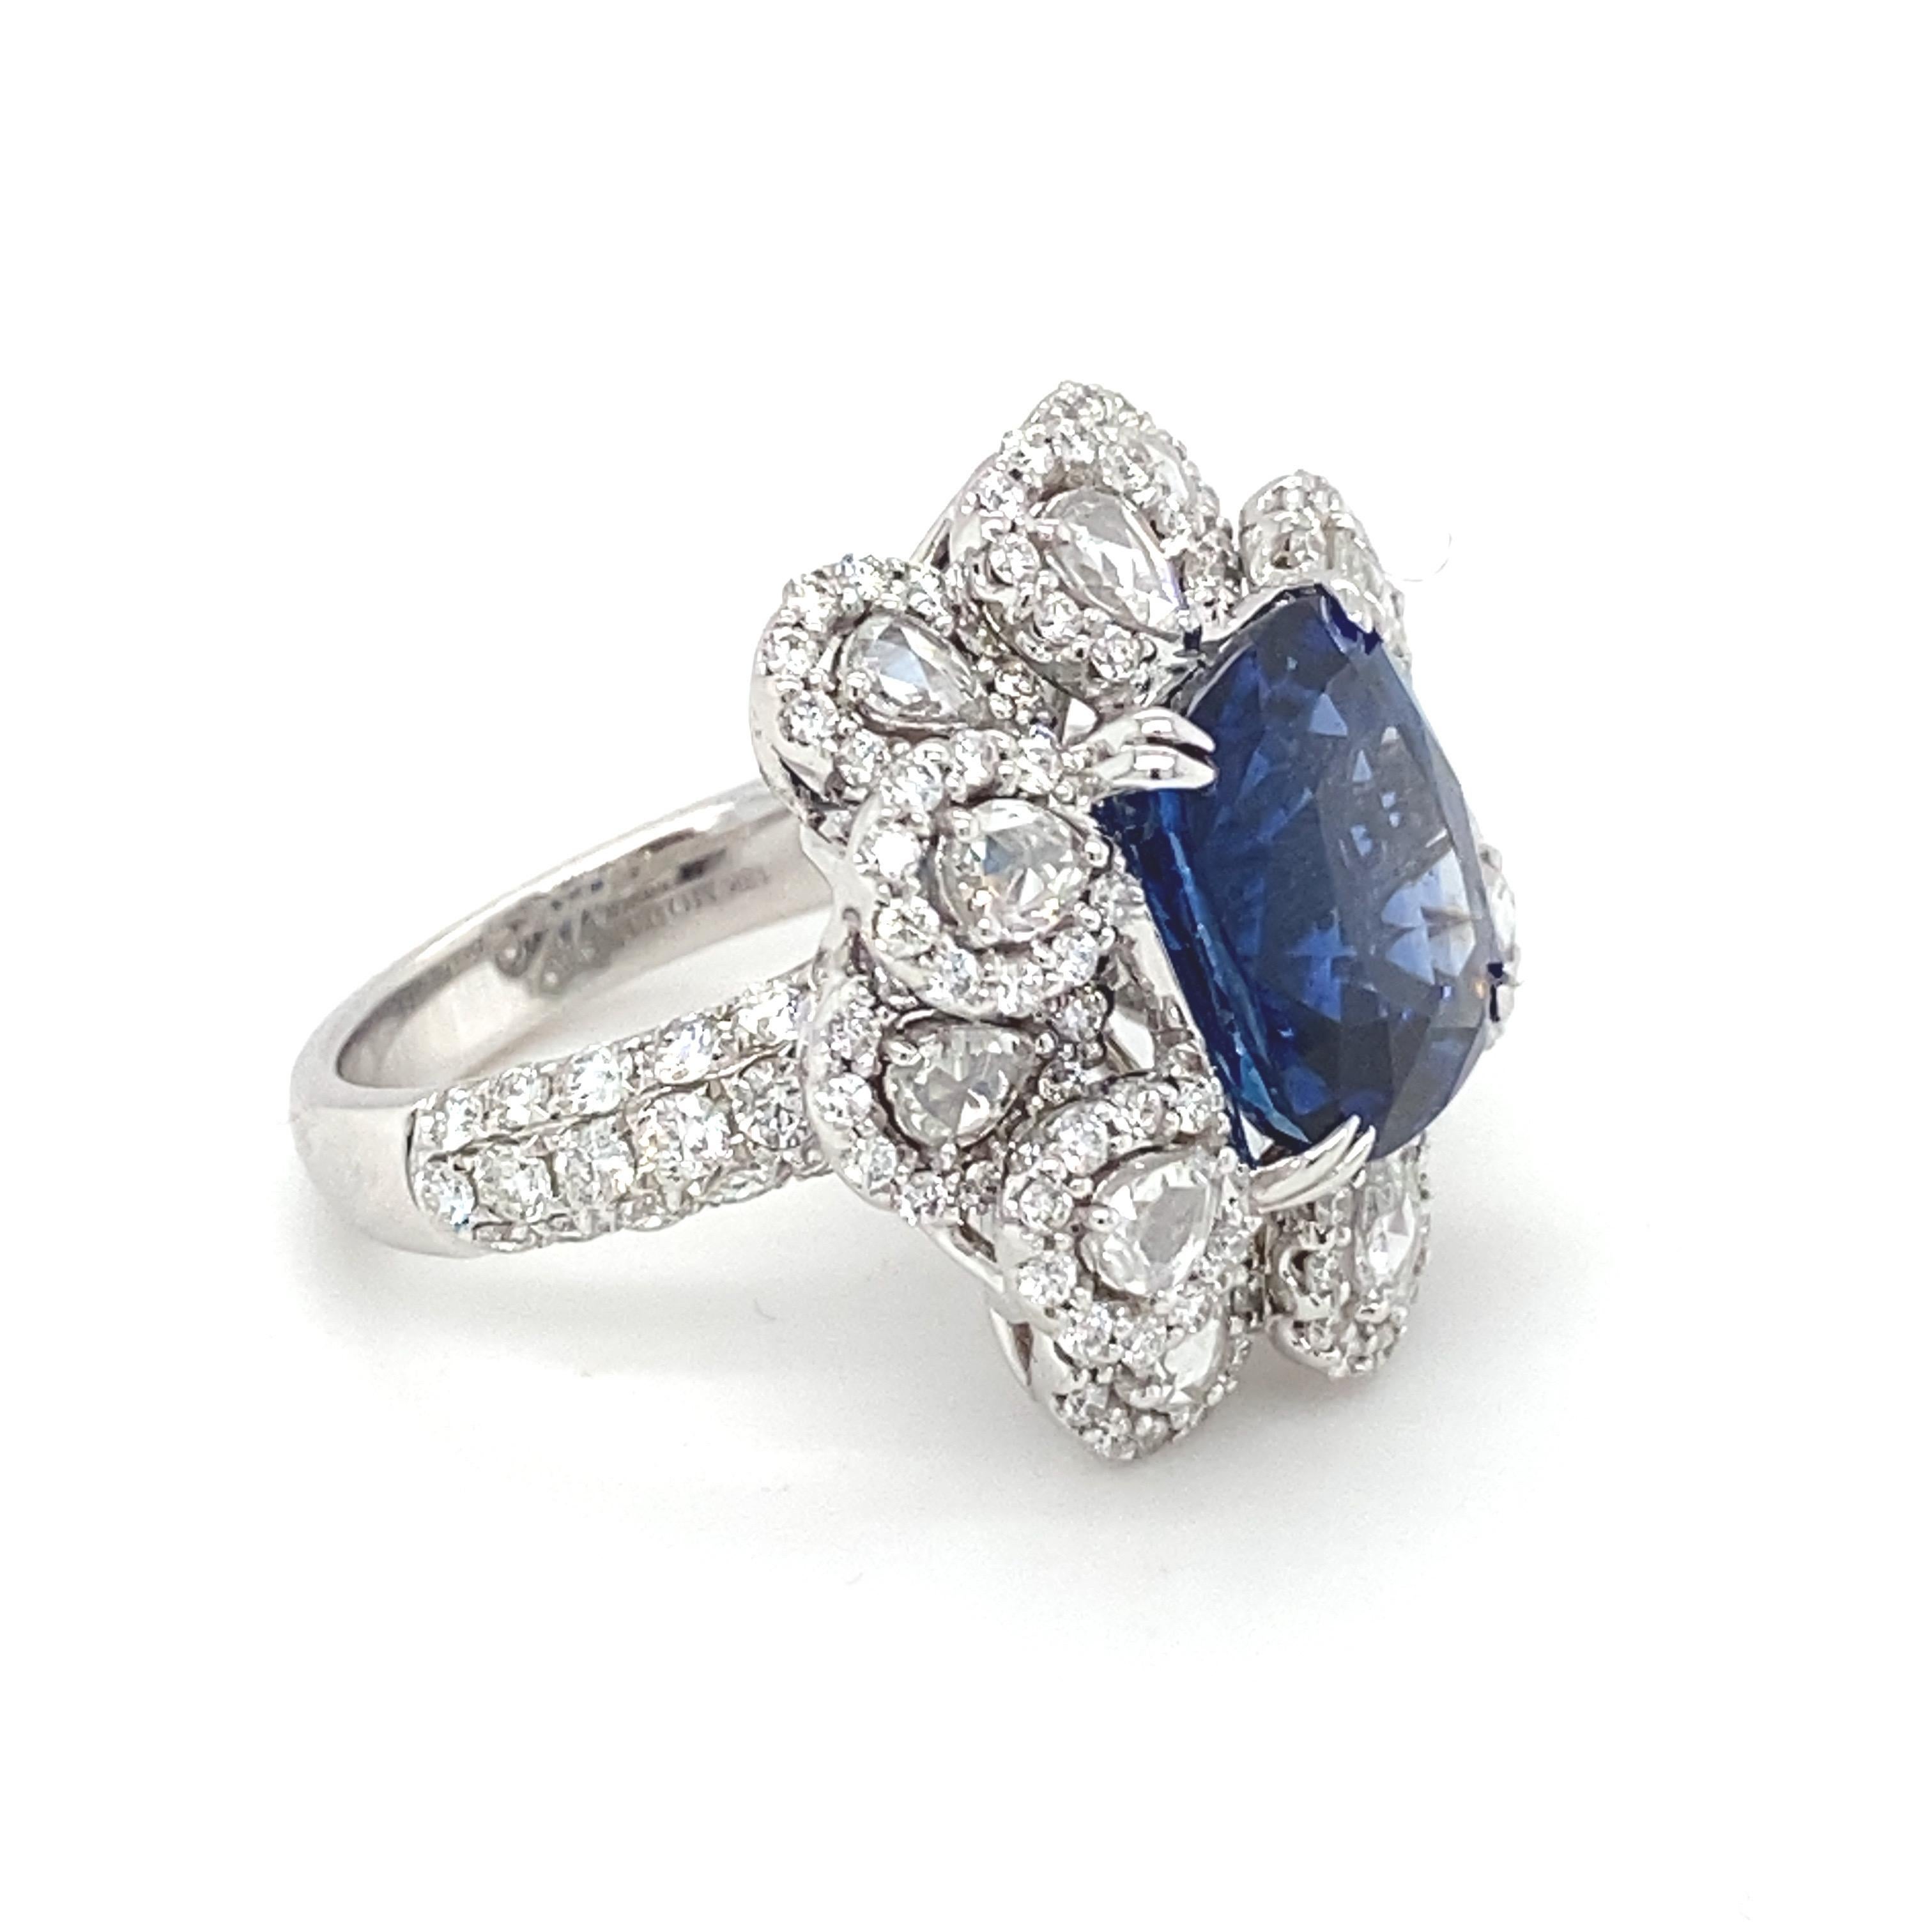 GIA Certified 7.87 Carat Cushion Shape Blue Sapphire Diamond 18K Engagement Ring In New Condition For Sale In Trumbull, CT